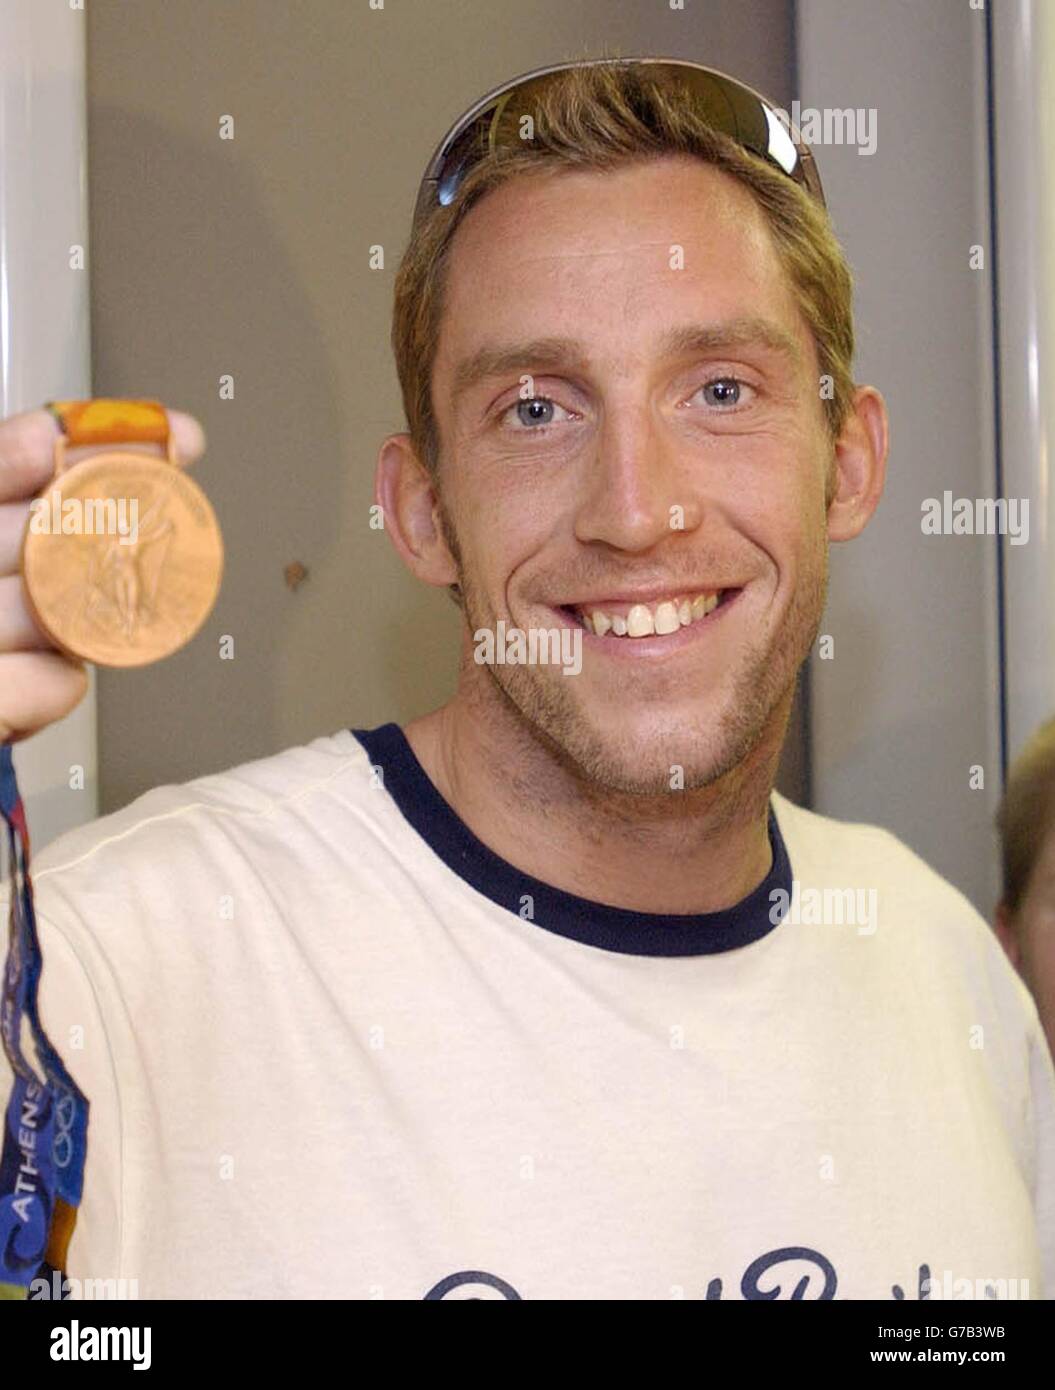 British Olympic swimmer Stephen Parry shows off his bronze medal won in the men's 200m butterfly, as he arrives home from the Athens games at Manchester Airport. Stock Photo